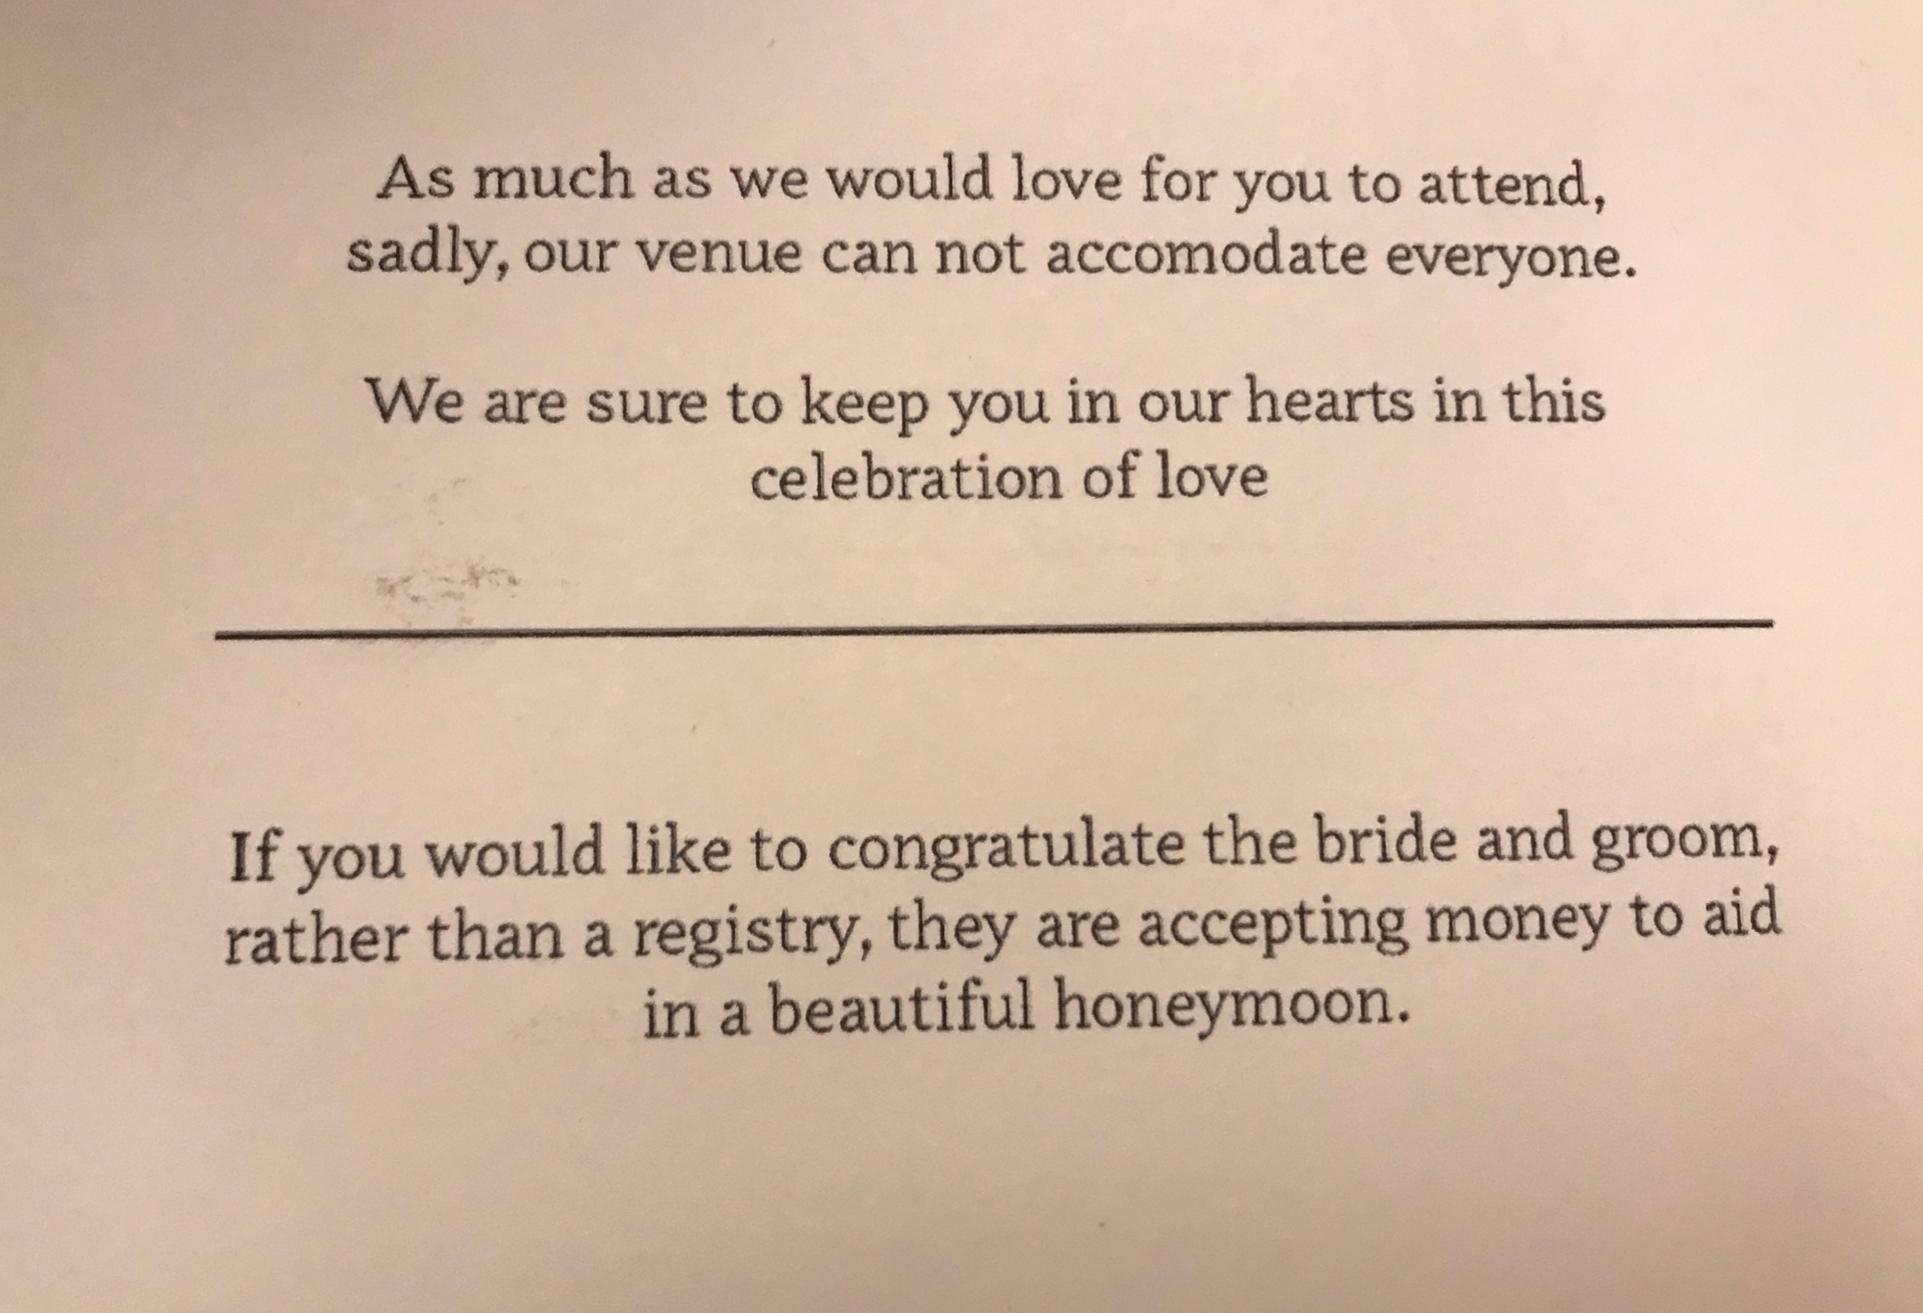 document - As much as we would love for you to attend, sadly, our venue can not accomodate everyone. We are sure to keep you in our hearts in this celebration of love If you would to congratulate the bride and groom, rather than a registry, they are accep